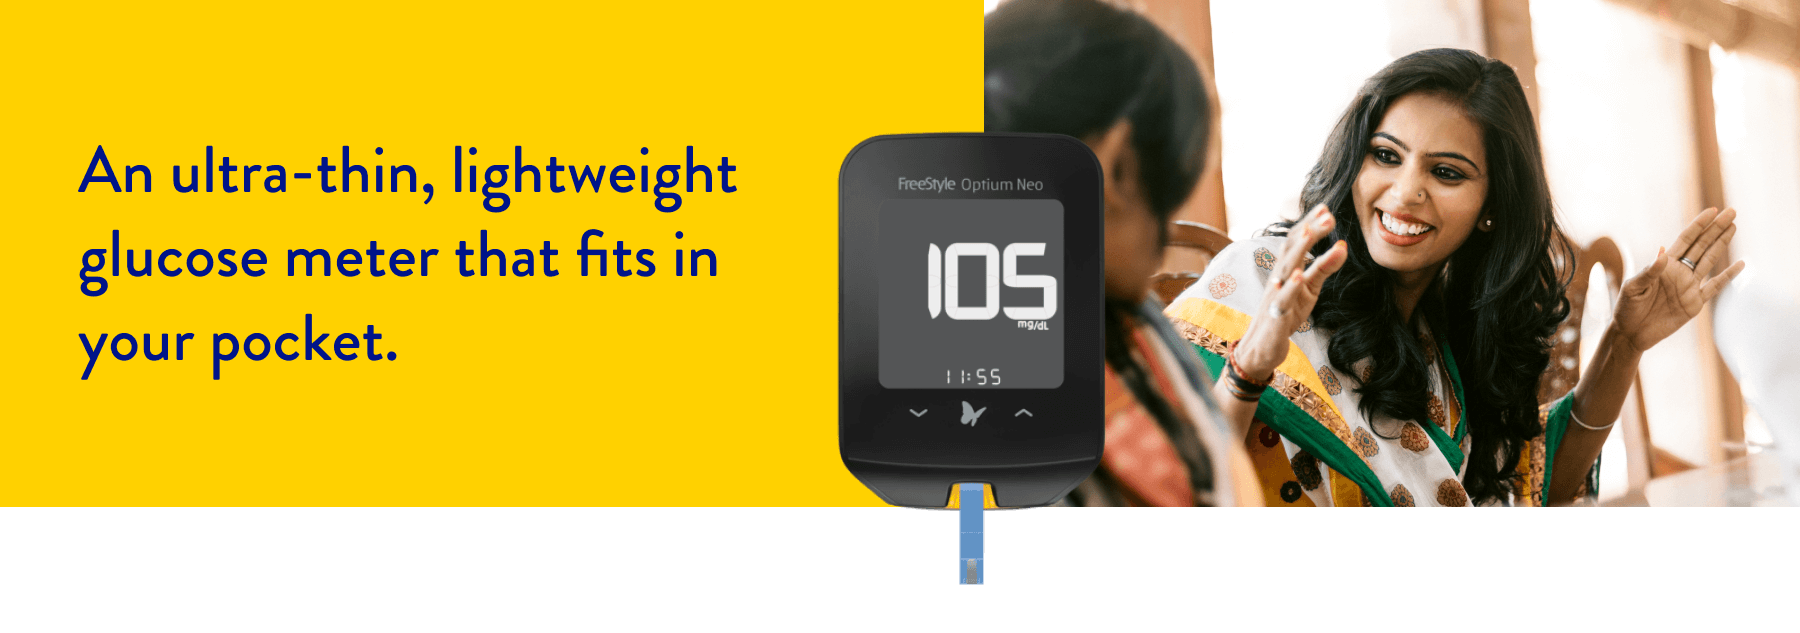 An ultra-thin, lightweight glucose meter that fits in your pocket.